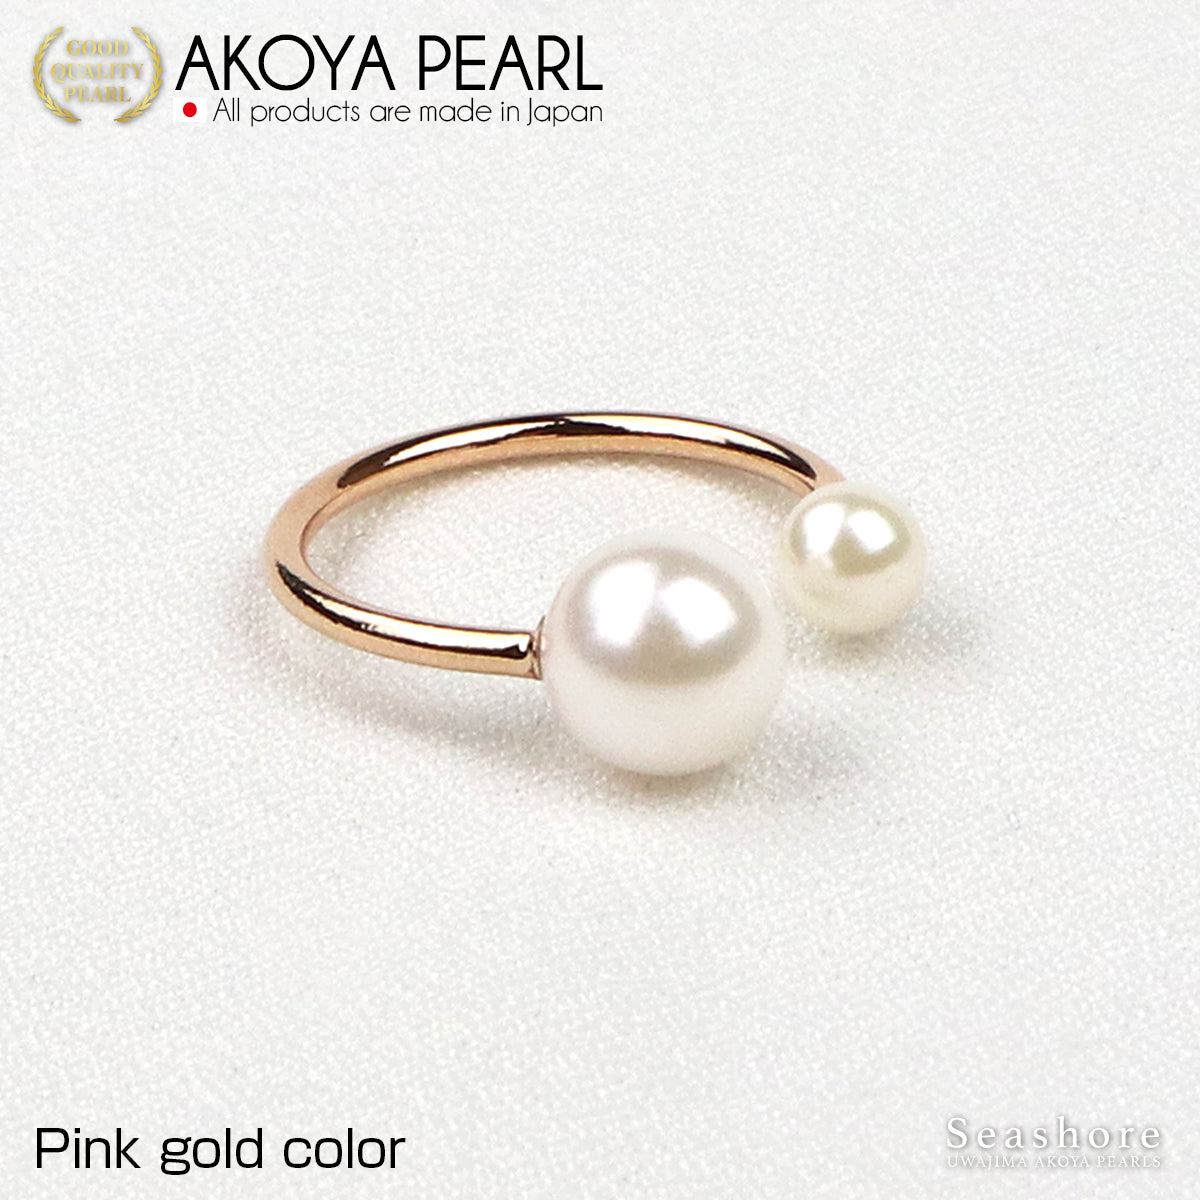 2 bead pearl ring 3 colors brass rhodium/pink gold/gold 5.0-8.5mm Akoya pearl folk ring free size